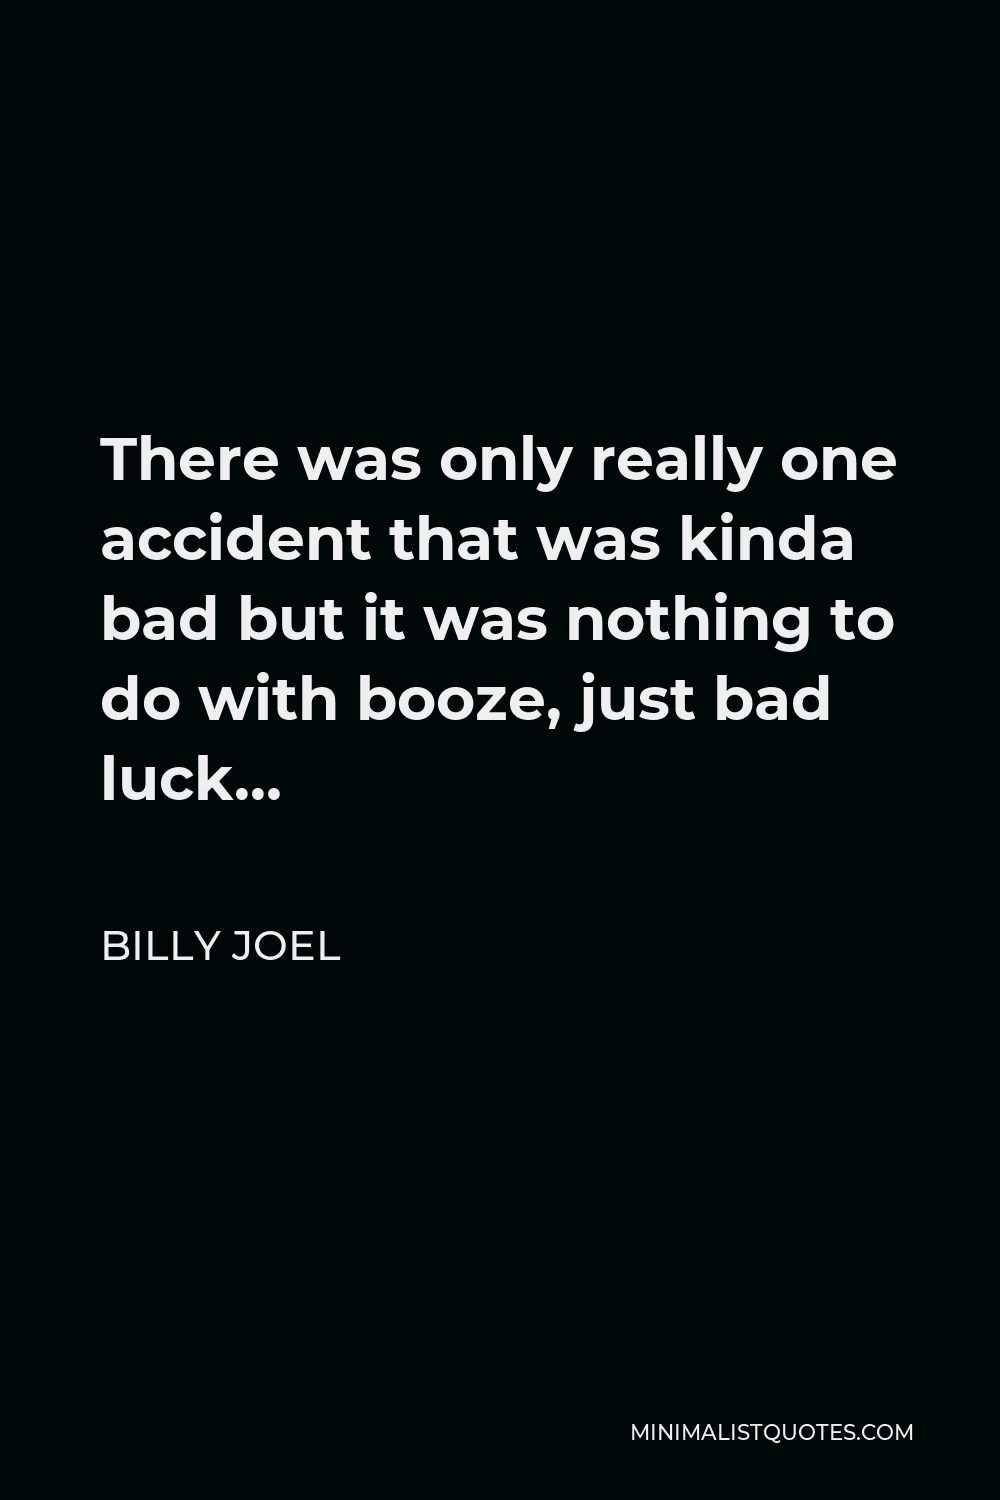 Billy Joel Quote - There was only really one accident that was kinda bad but it was nothing to do with booze, just bad luck…